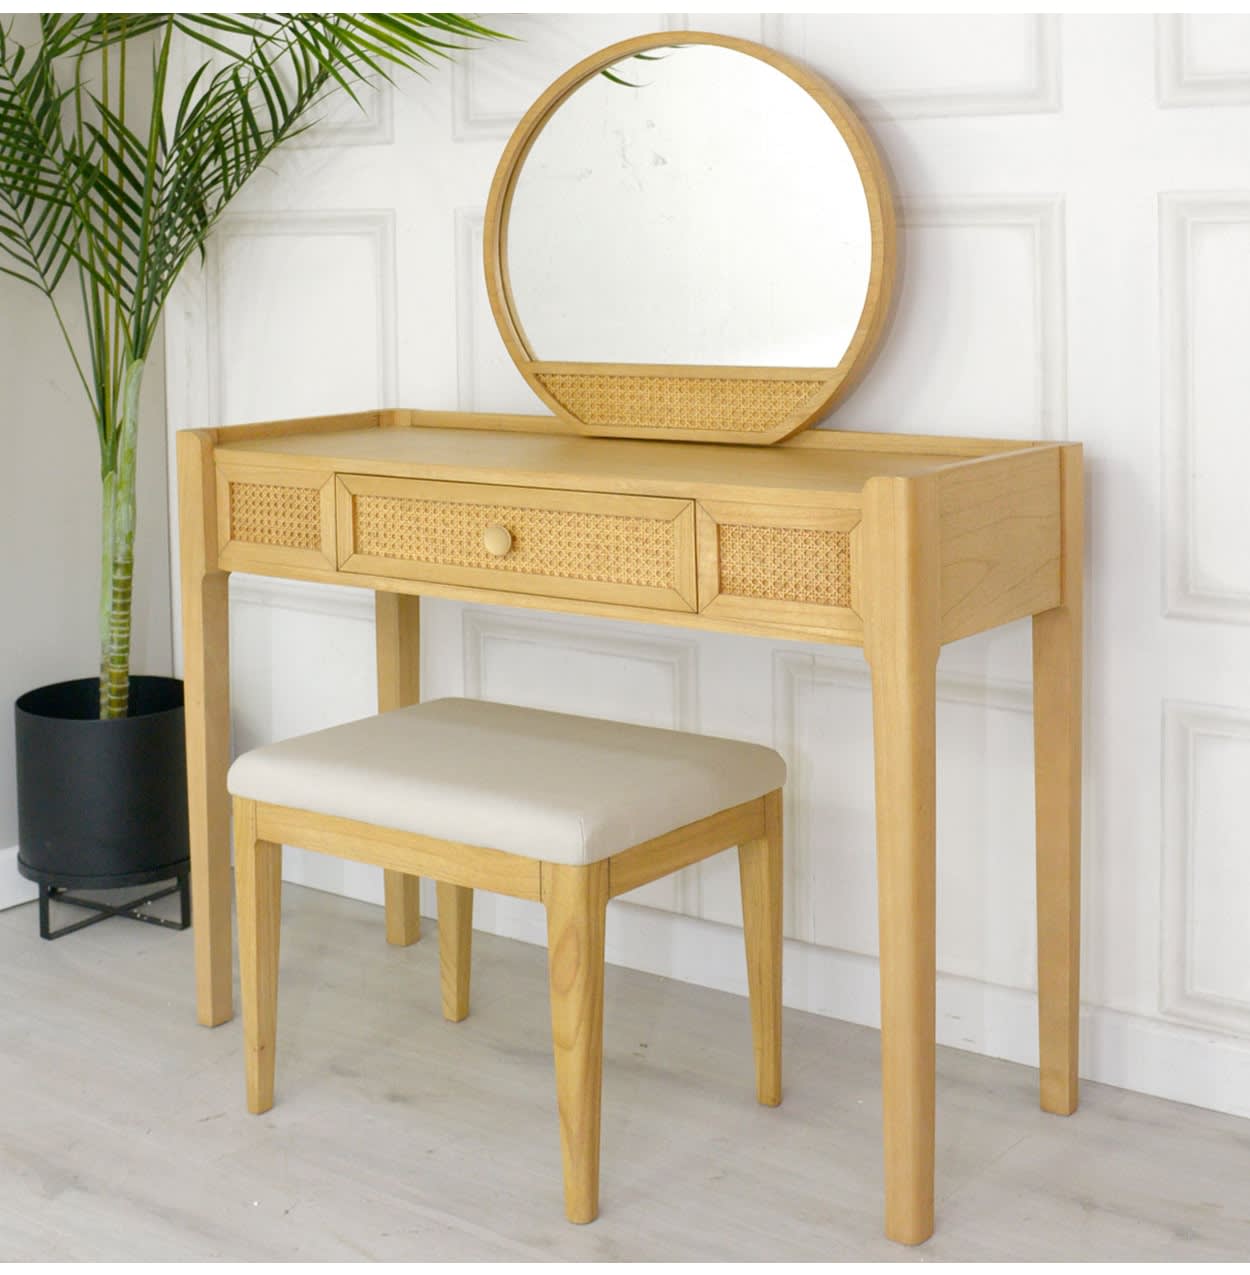 Bali Rattan Dressing Table Mirror and Stool Set by Baker Furniture | Nicky Cornell a UK Stockist